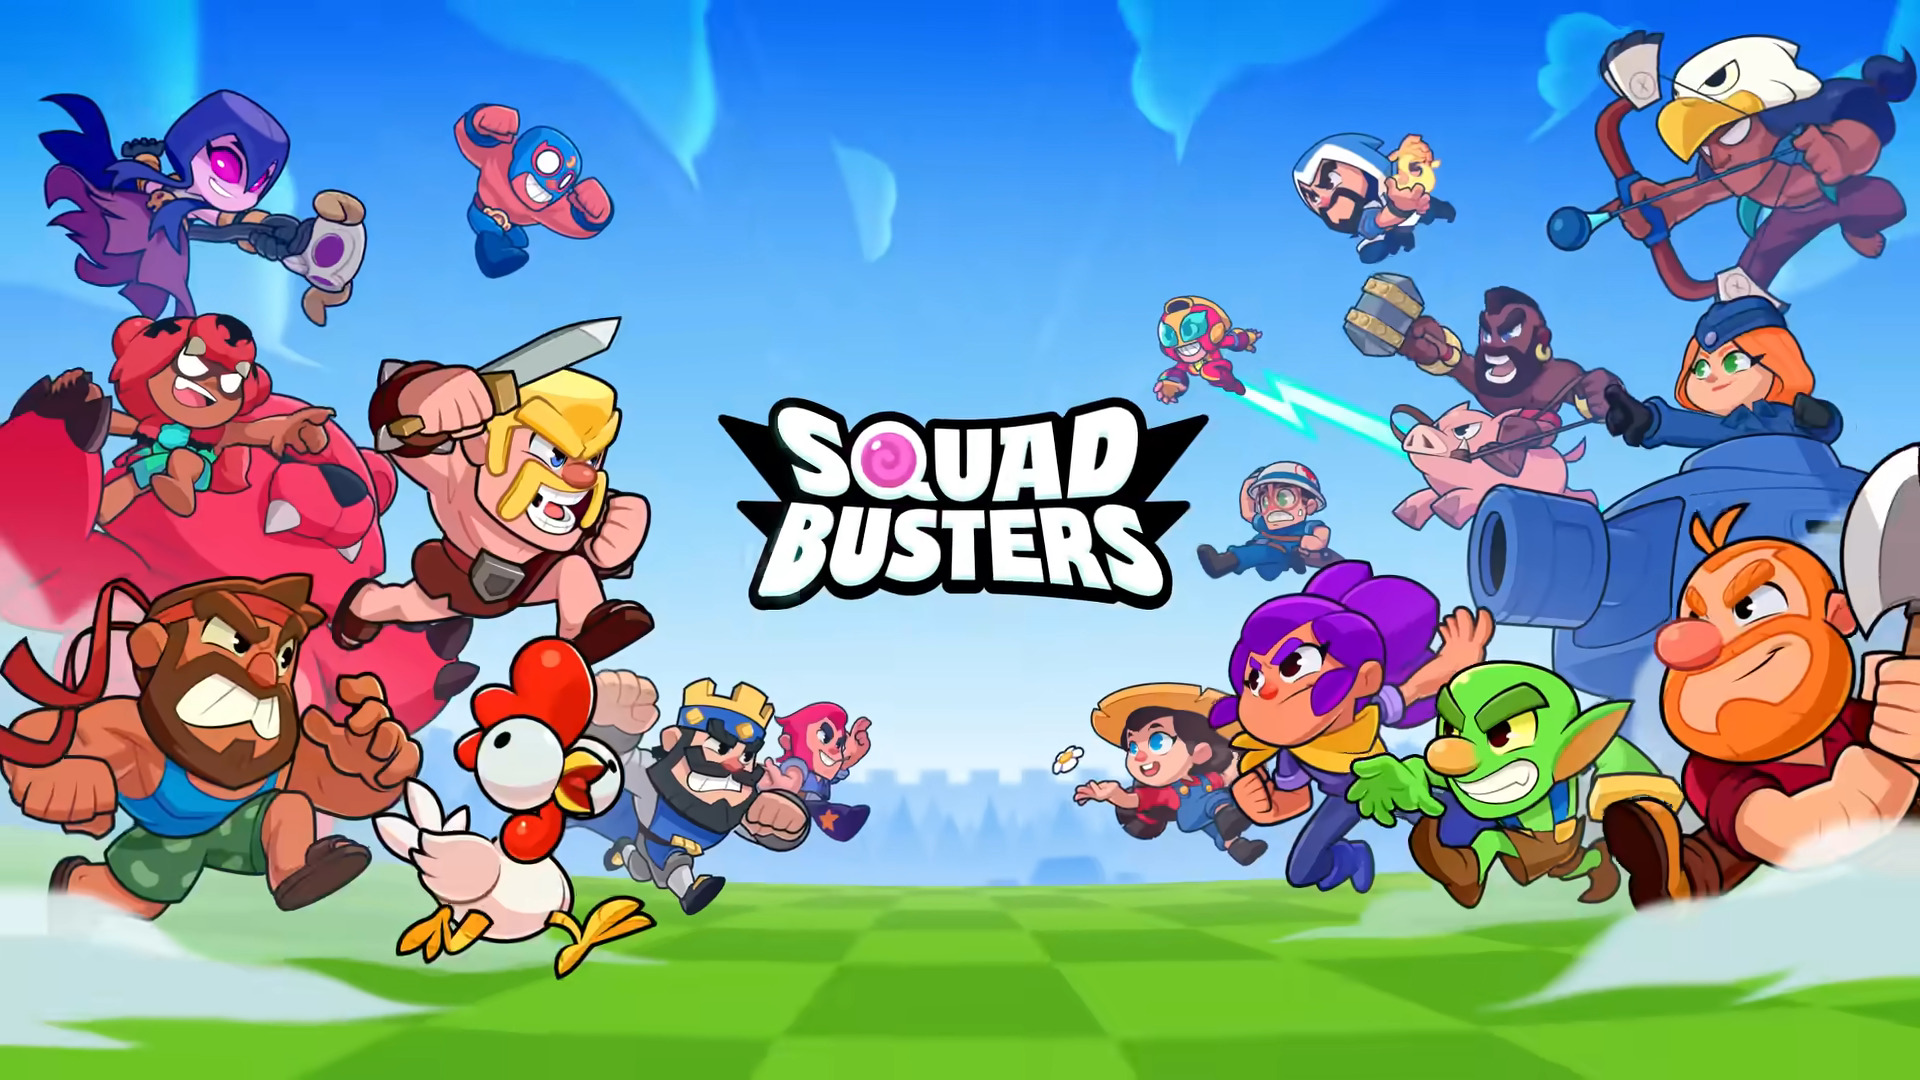 Scarica Squad Busters gratis per Android.